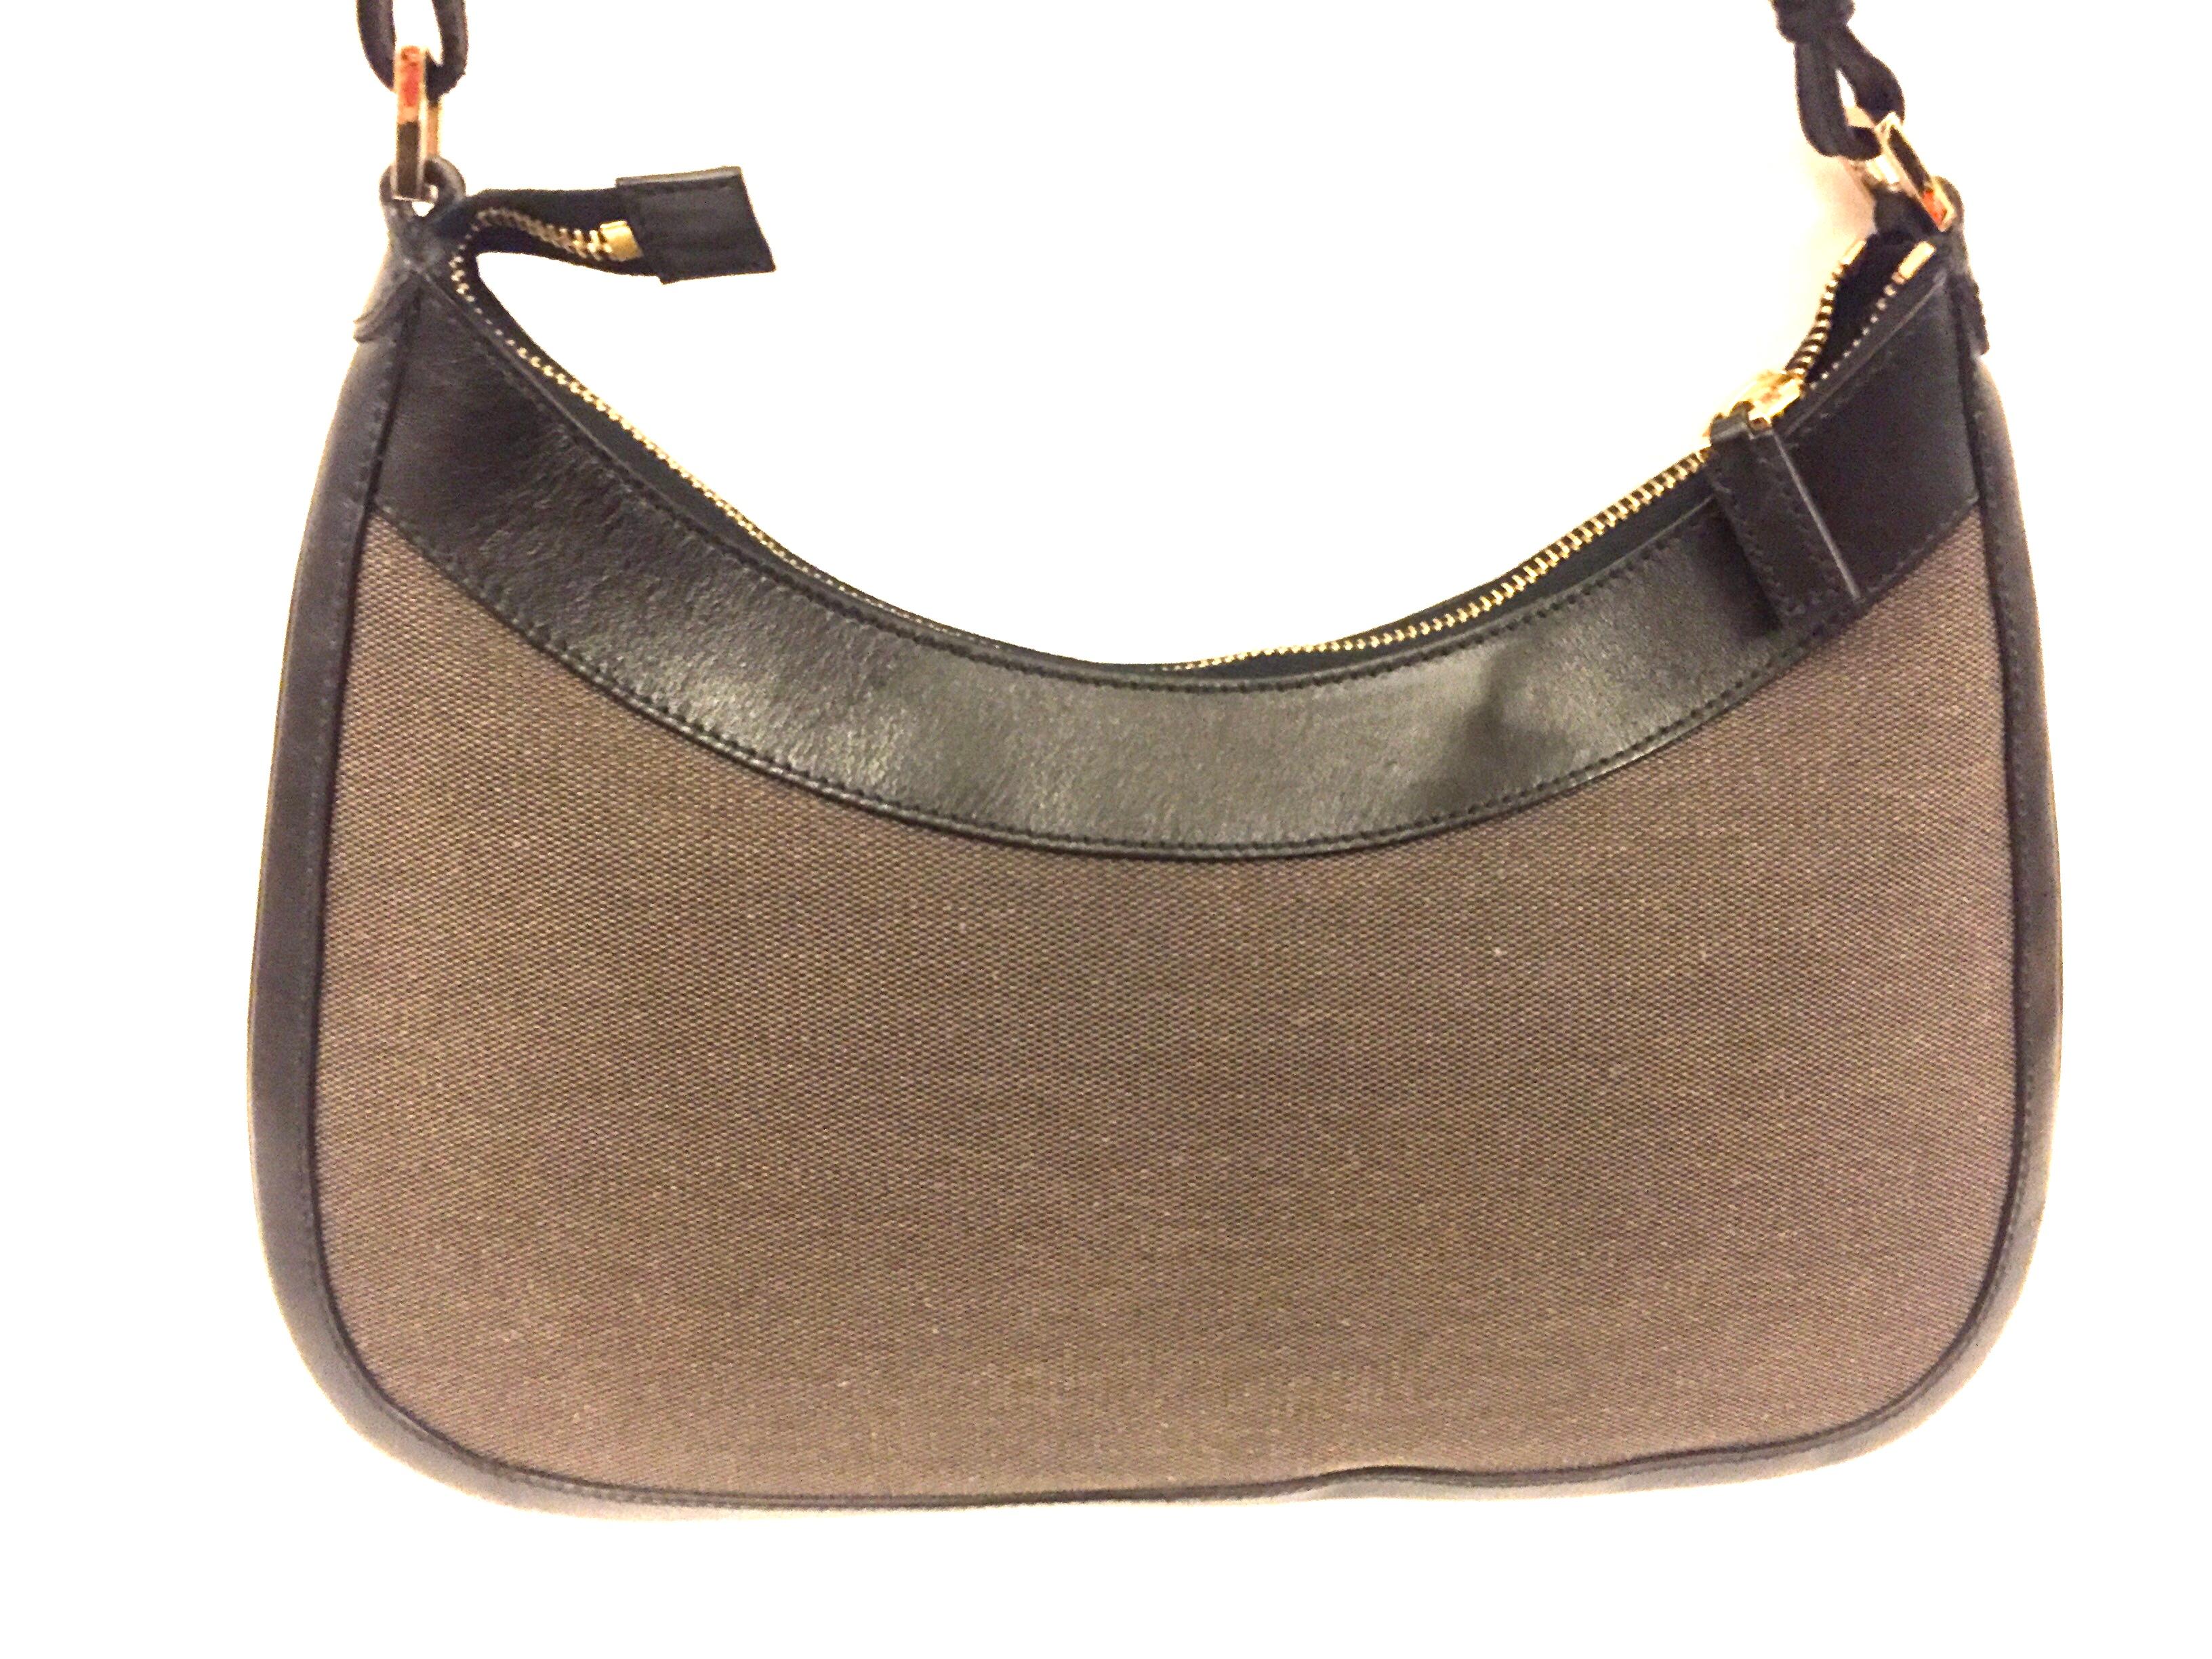 Black Gucci black leather and brown canvas hobo style bag